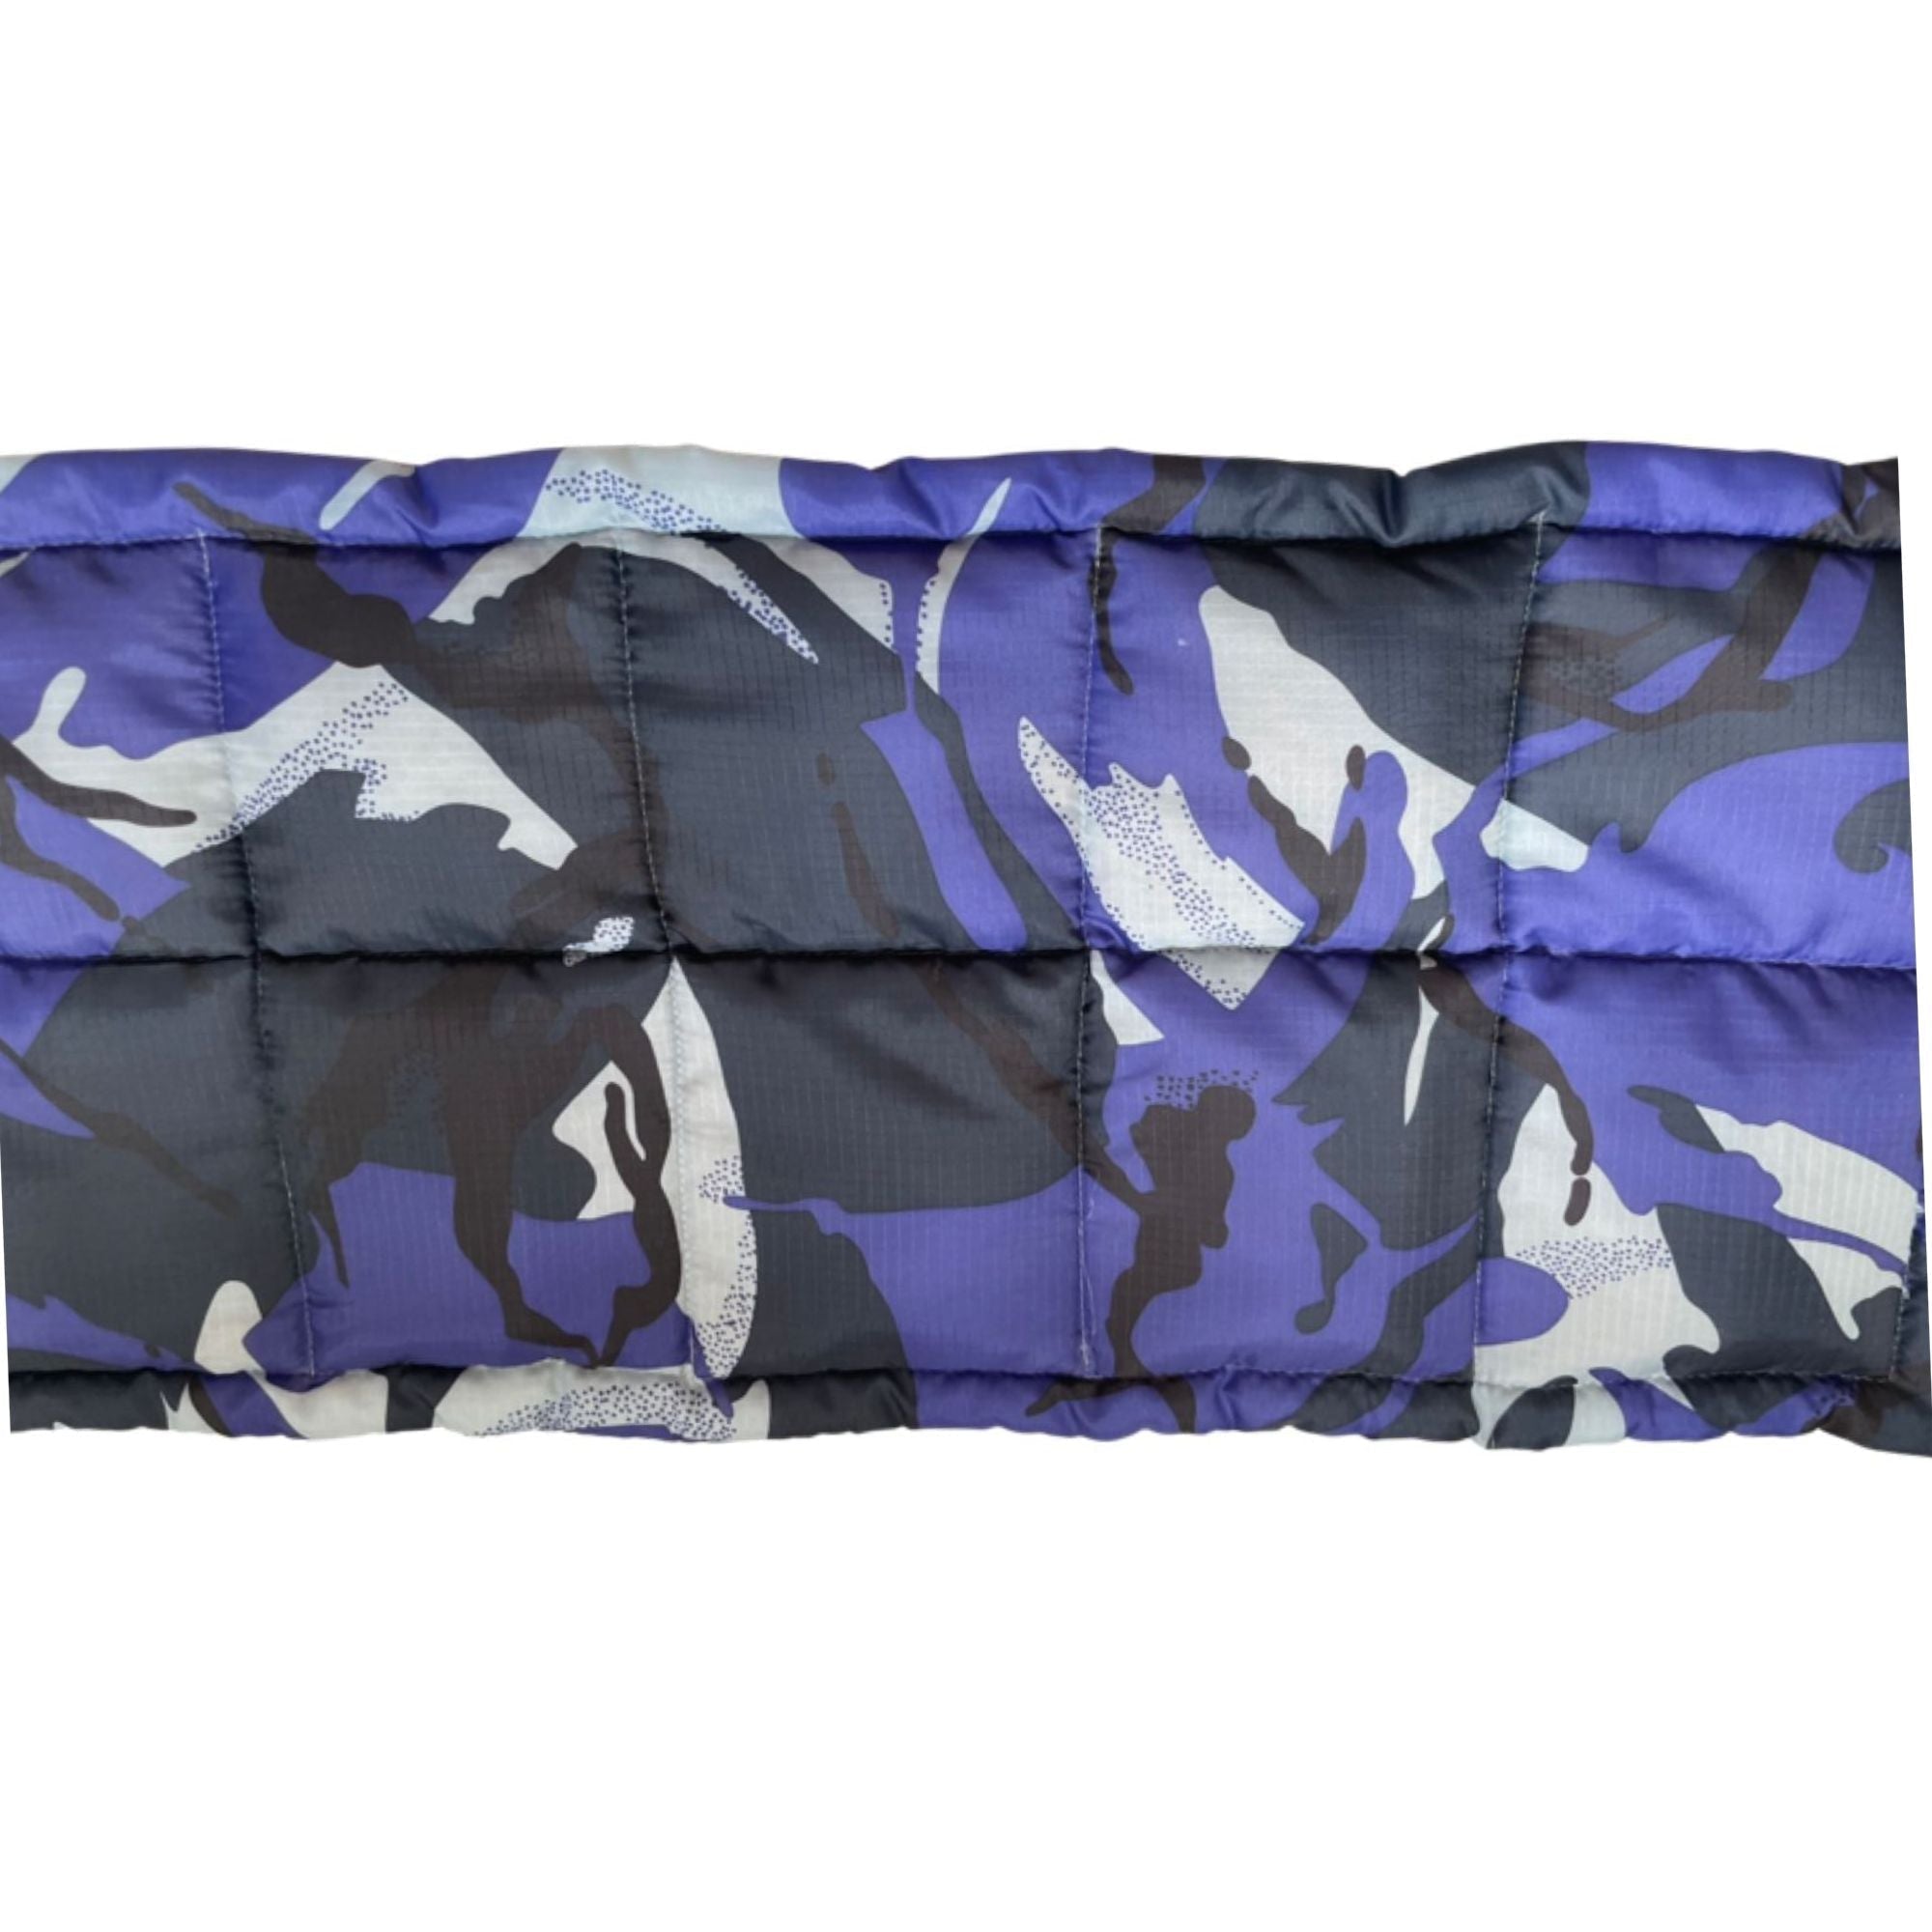 Camo Weighted Lap Pad, Sensory Education's Weighted Lap Pads are designed to apply calming deep pressure to the lap and upper legs whilst the user is sitting down. The weight is provided by plastic beads sewn into small individual cells that mould themselves to the body or legs. The user experiences the deep pressure from the weight of the Lap Pad which has a calming effect helping attention span and reducing excessive fidgeting. Because of the size of the Lap Pad, it is a cost effective, safe and portable 